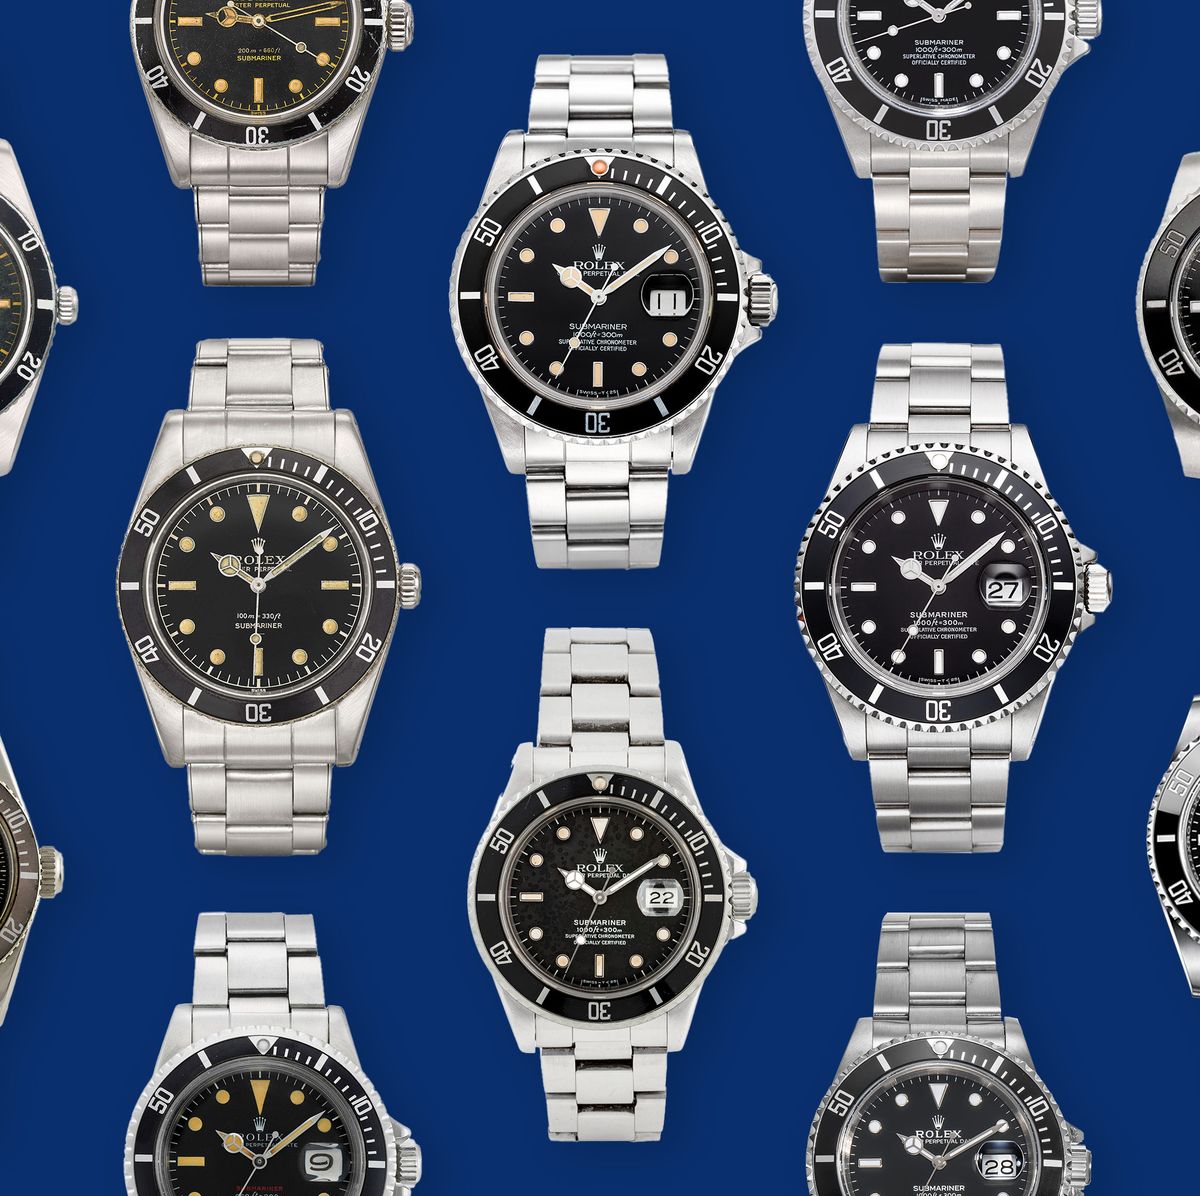 The Rolex Submariner: Everything You Need to